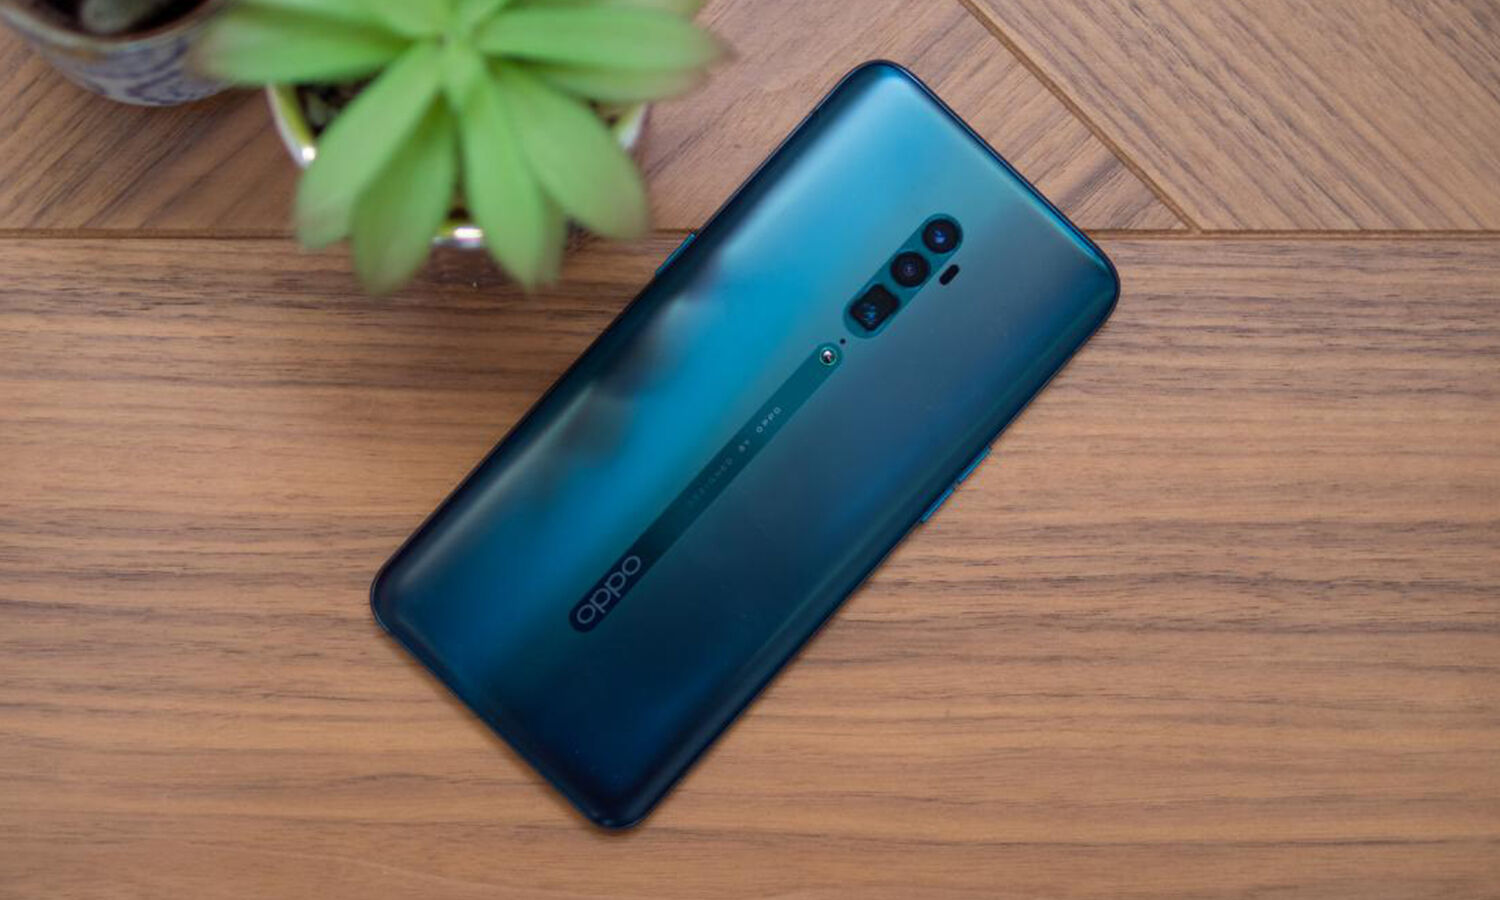 Oppo Top 5 Smartphone: These powerful smartphones of Oppo, which have great camera and long battery